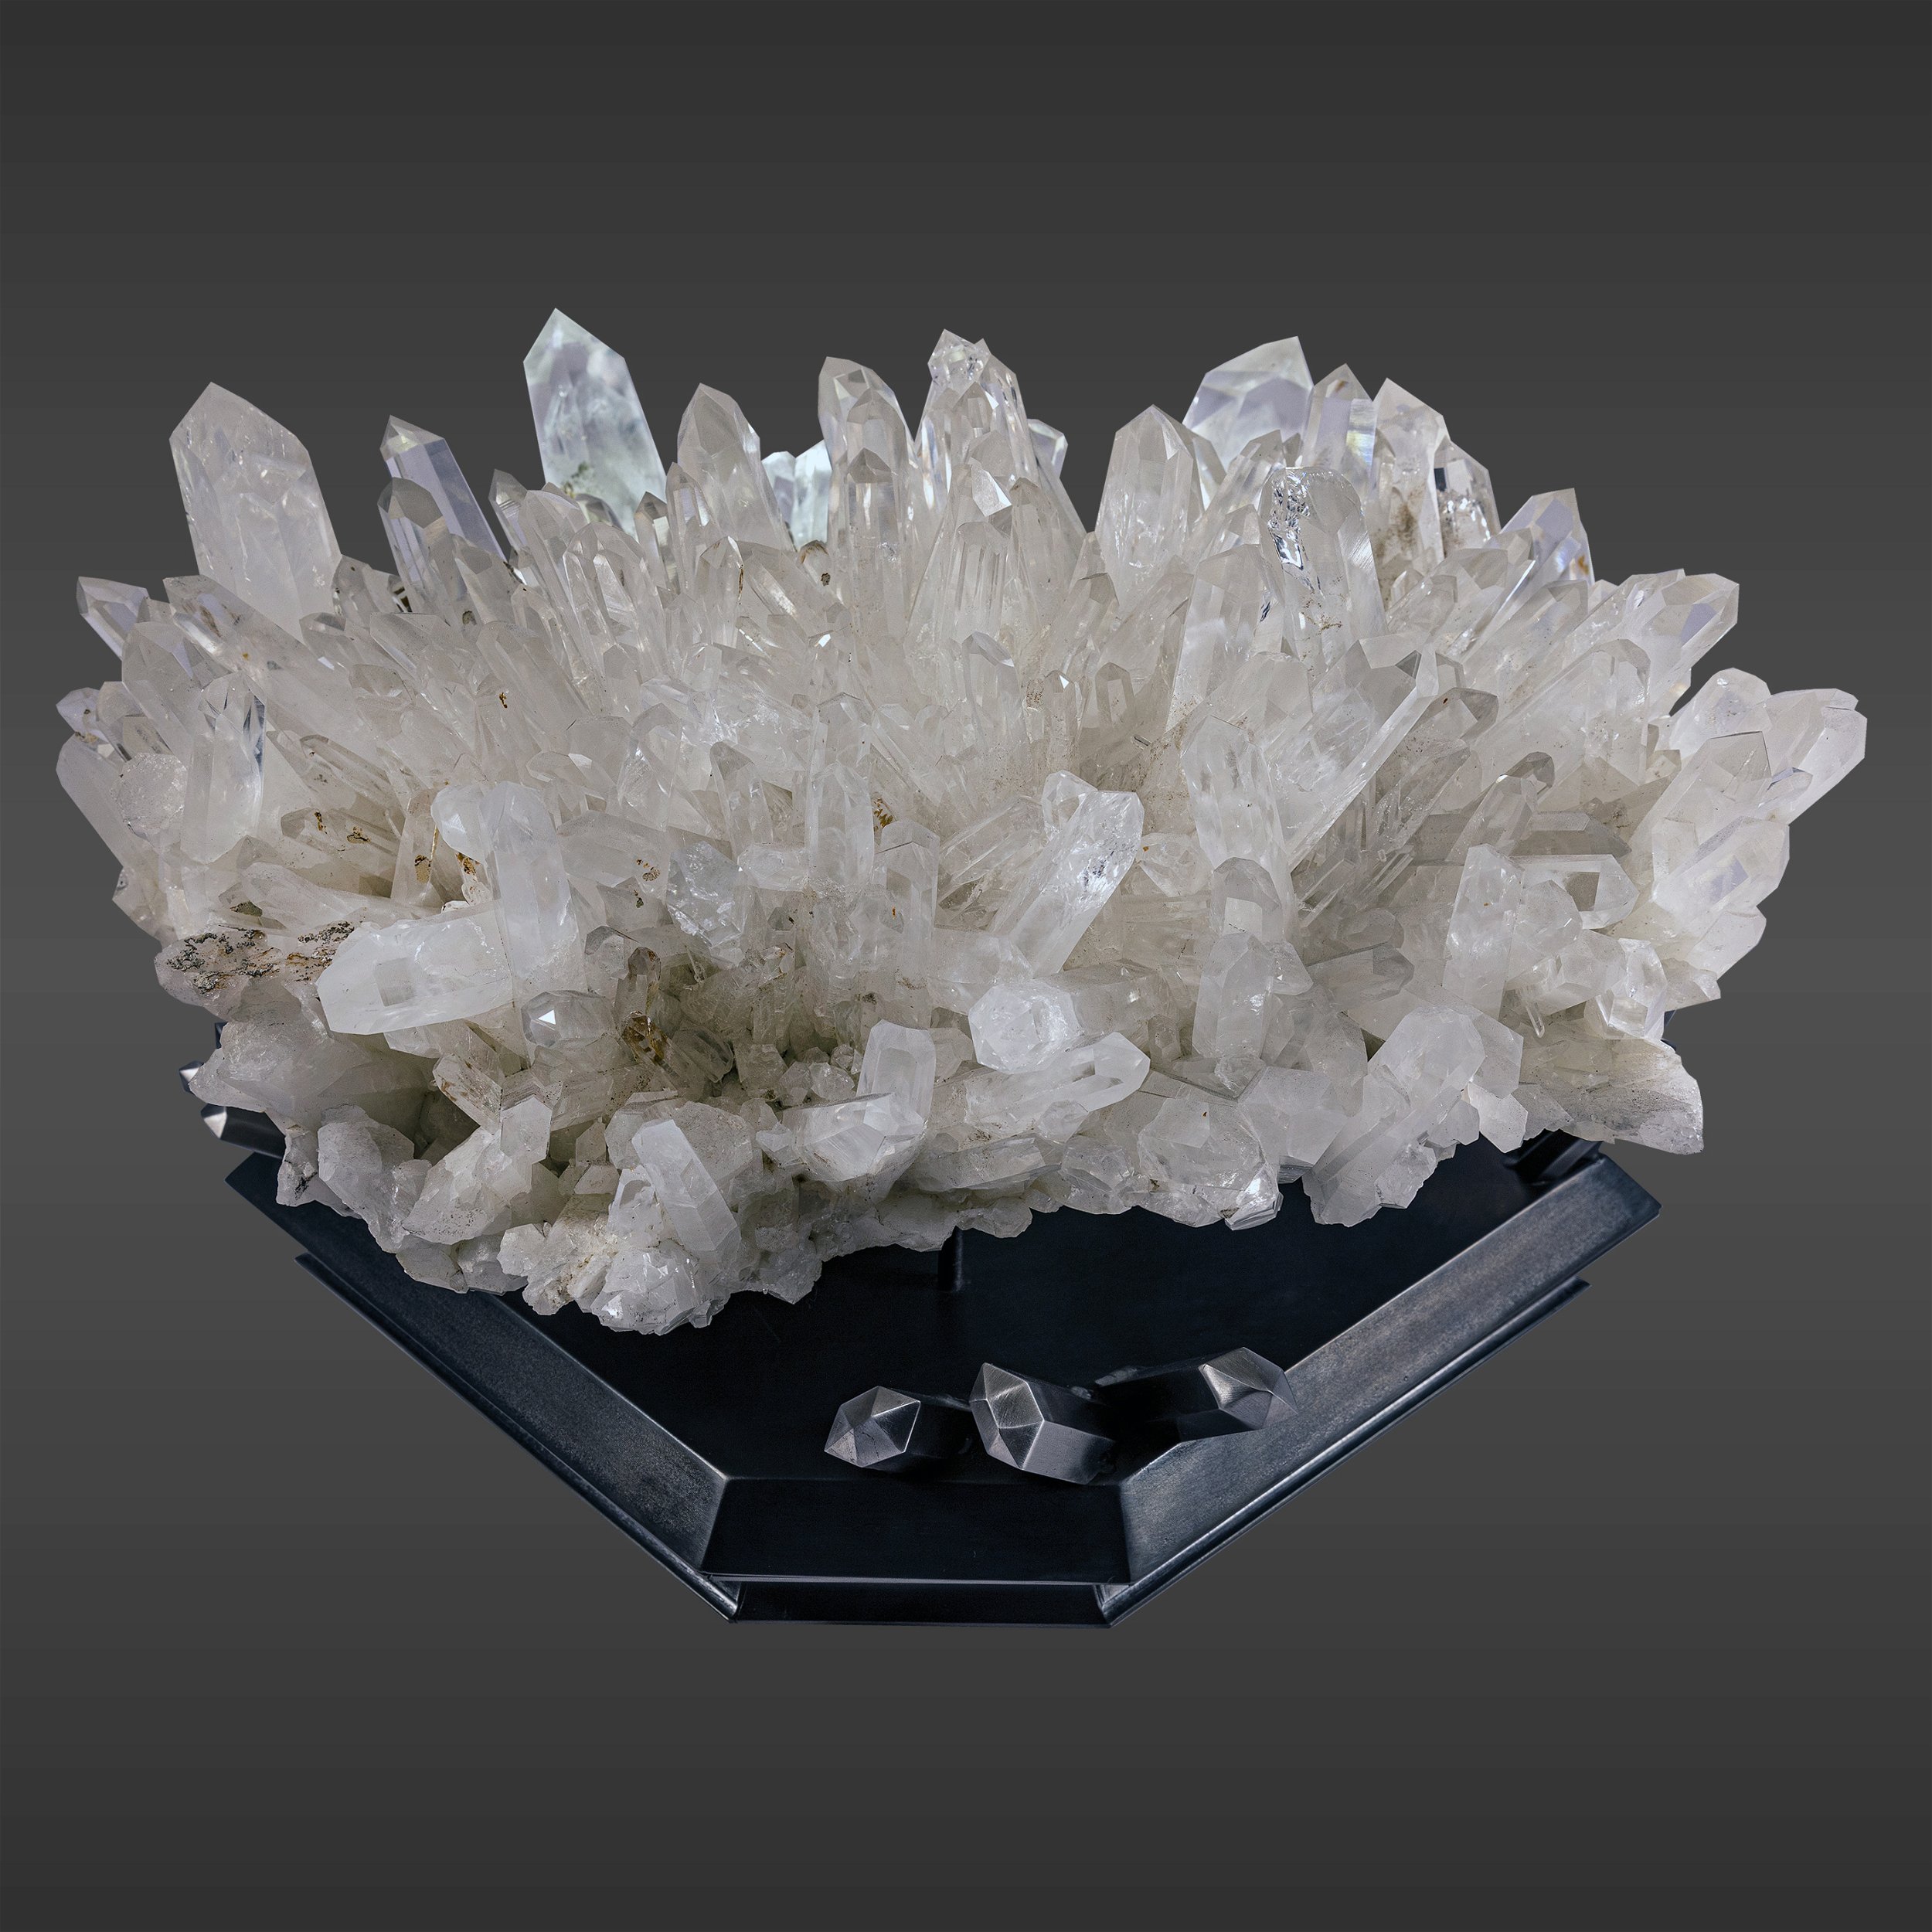 Rare Colombian Quartz Crystal Cluster With Phantom Inclusions On Custom Artistic Stand